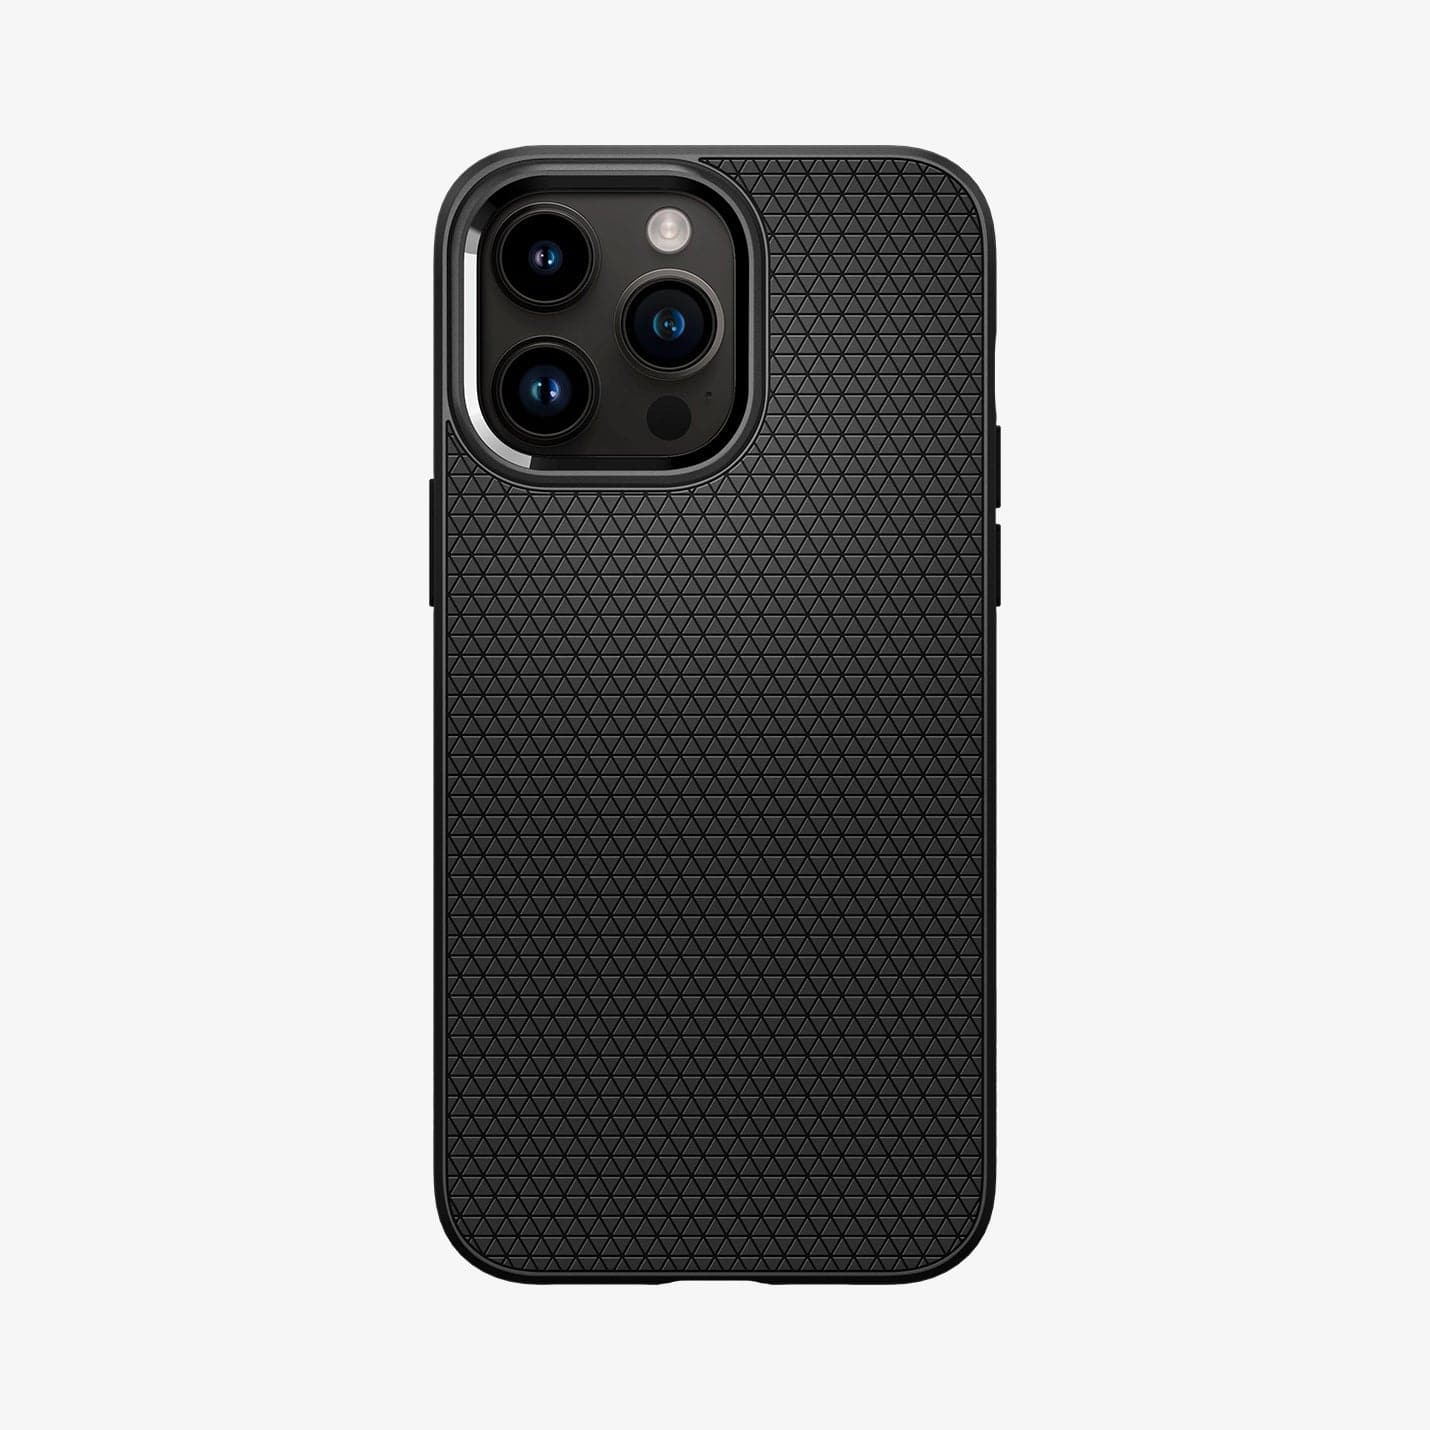 ACS04813 - iPhone 14 Pro Max Case Liquid Air in matte black showing the back